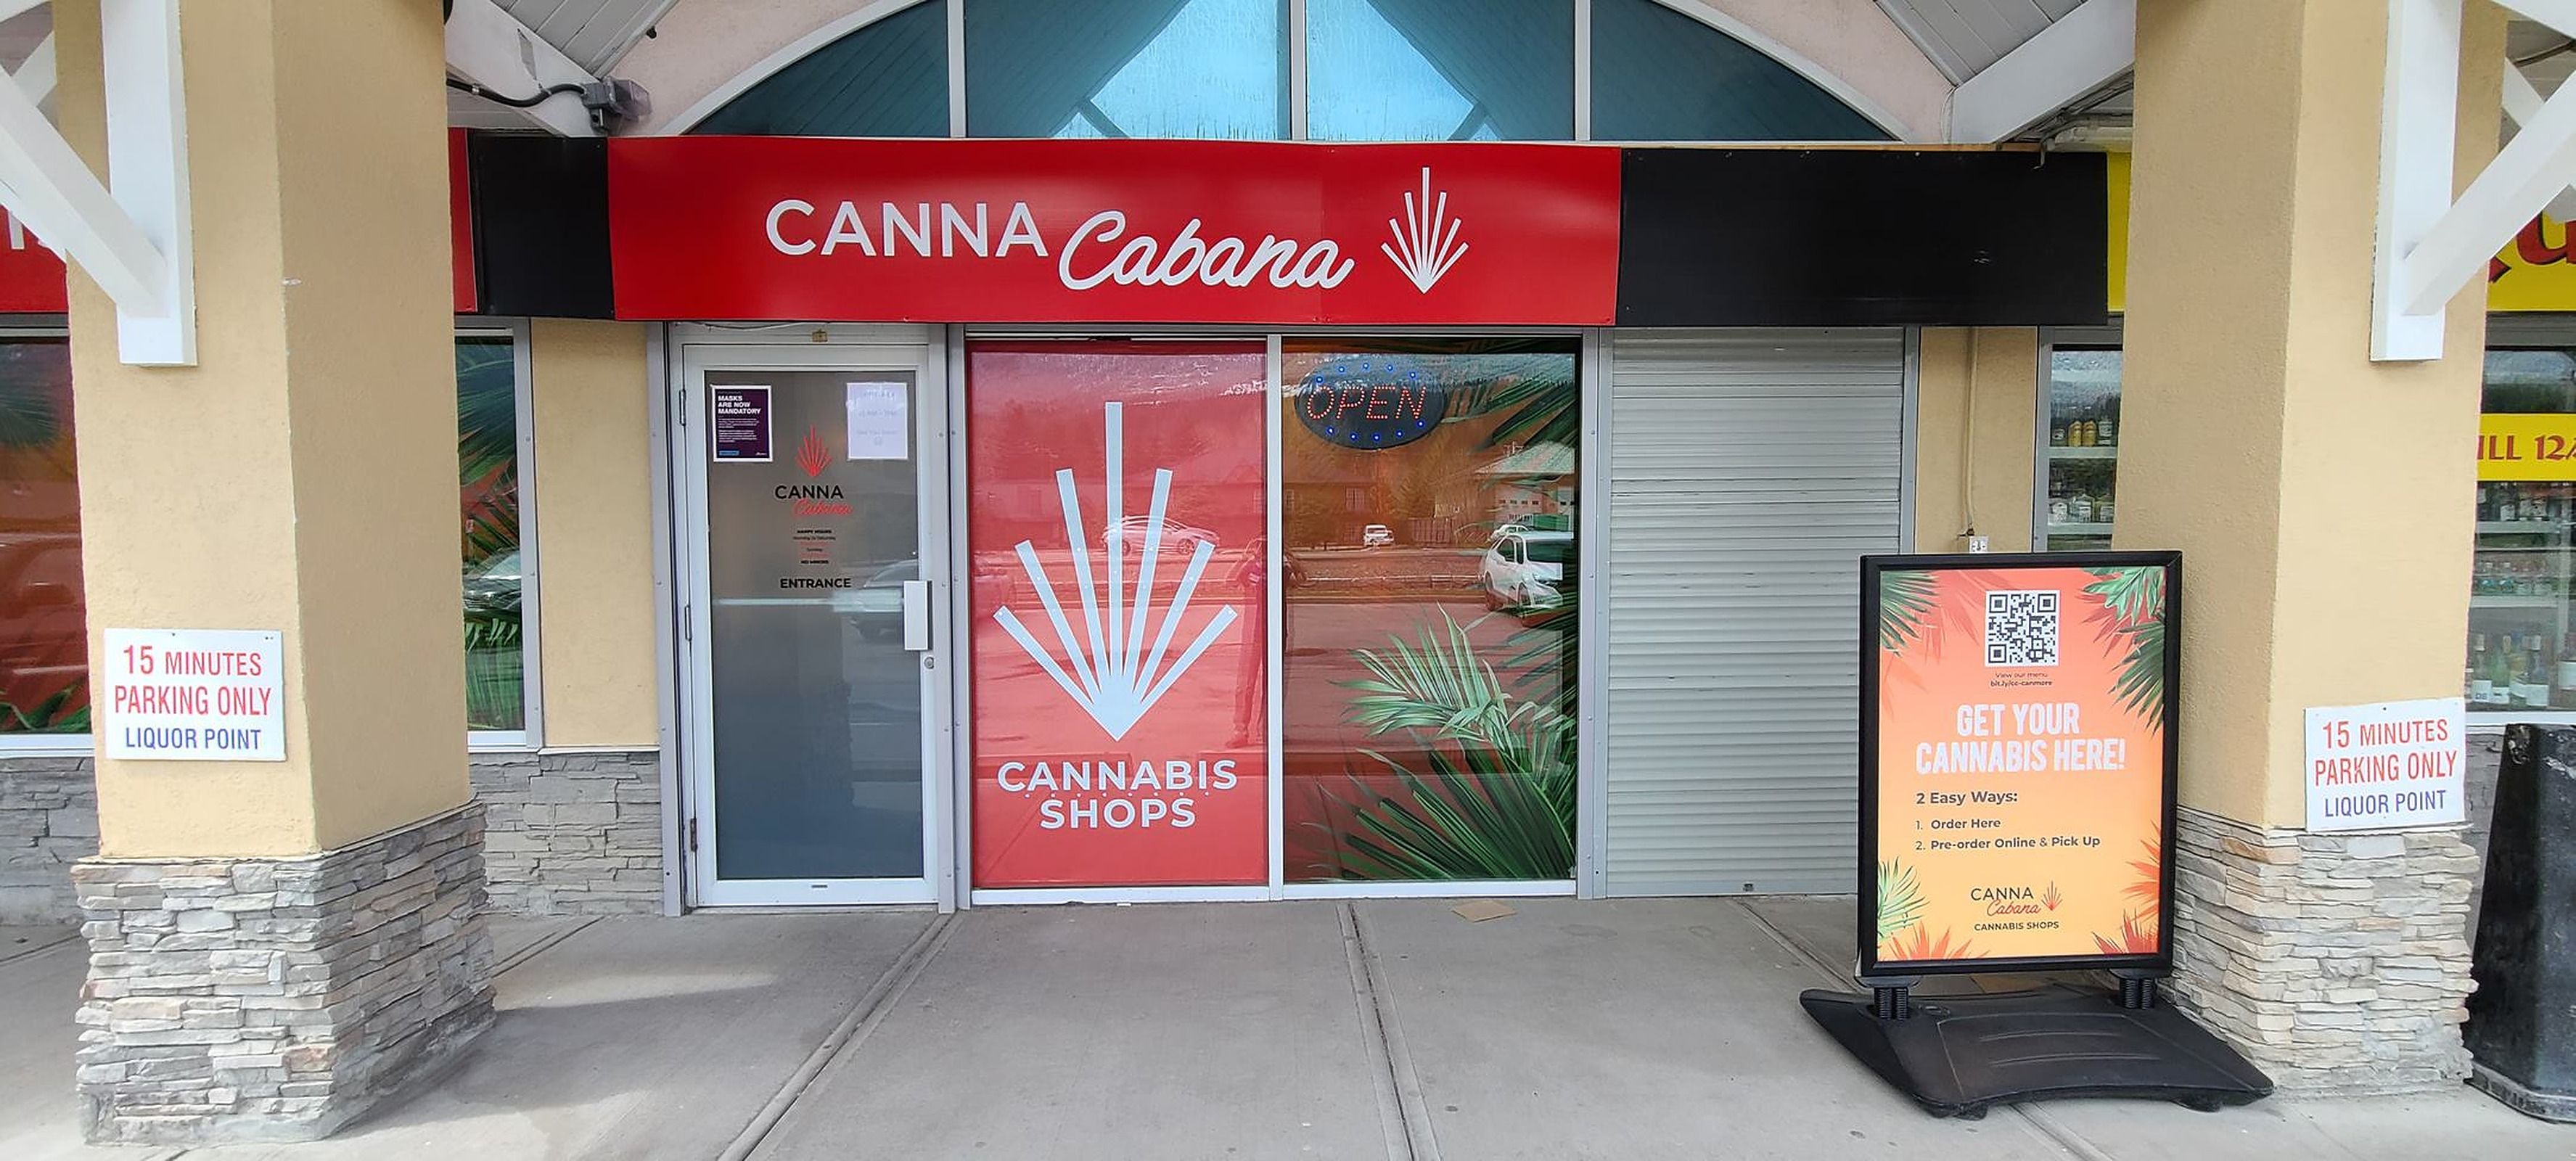 Cannabis Store Canna Cabana - Canmore - 4